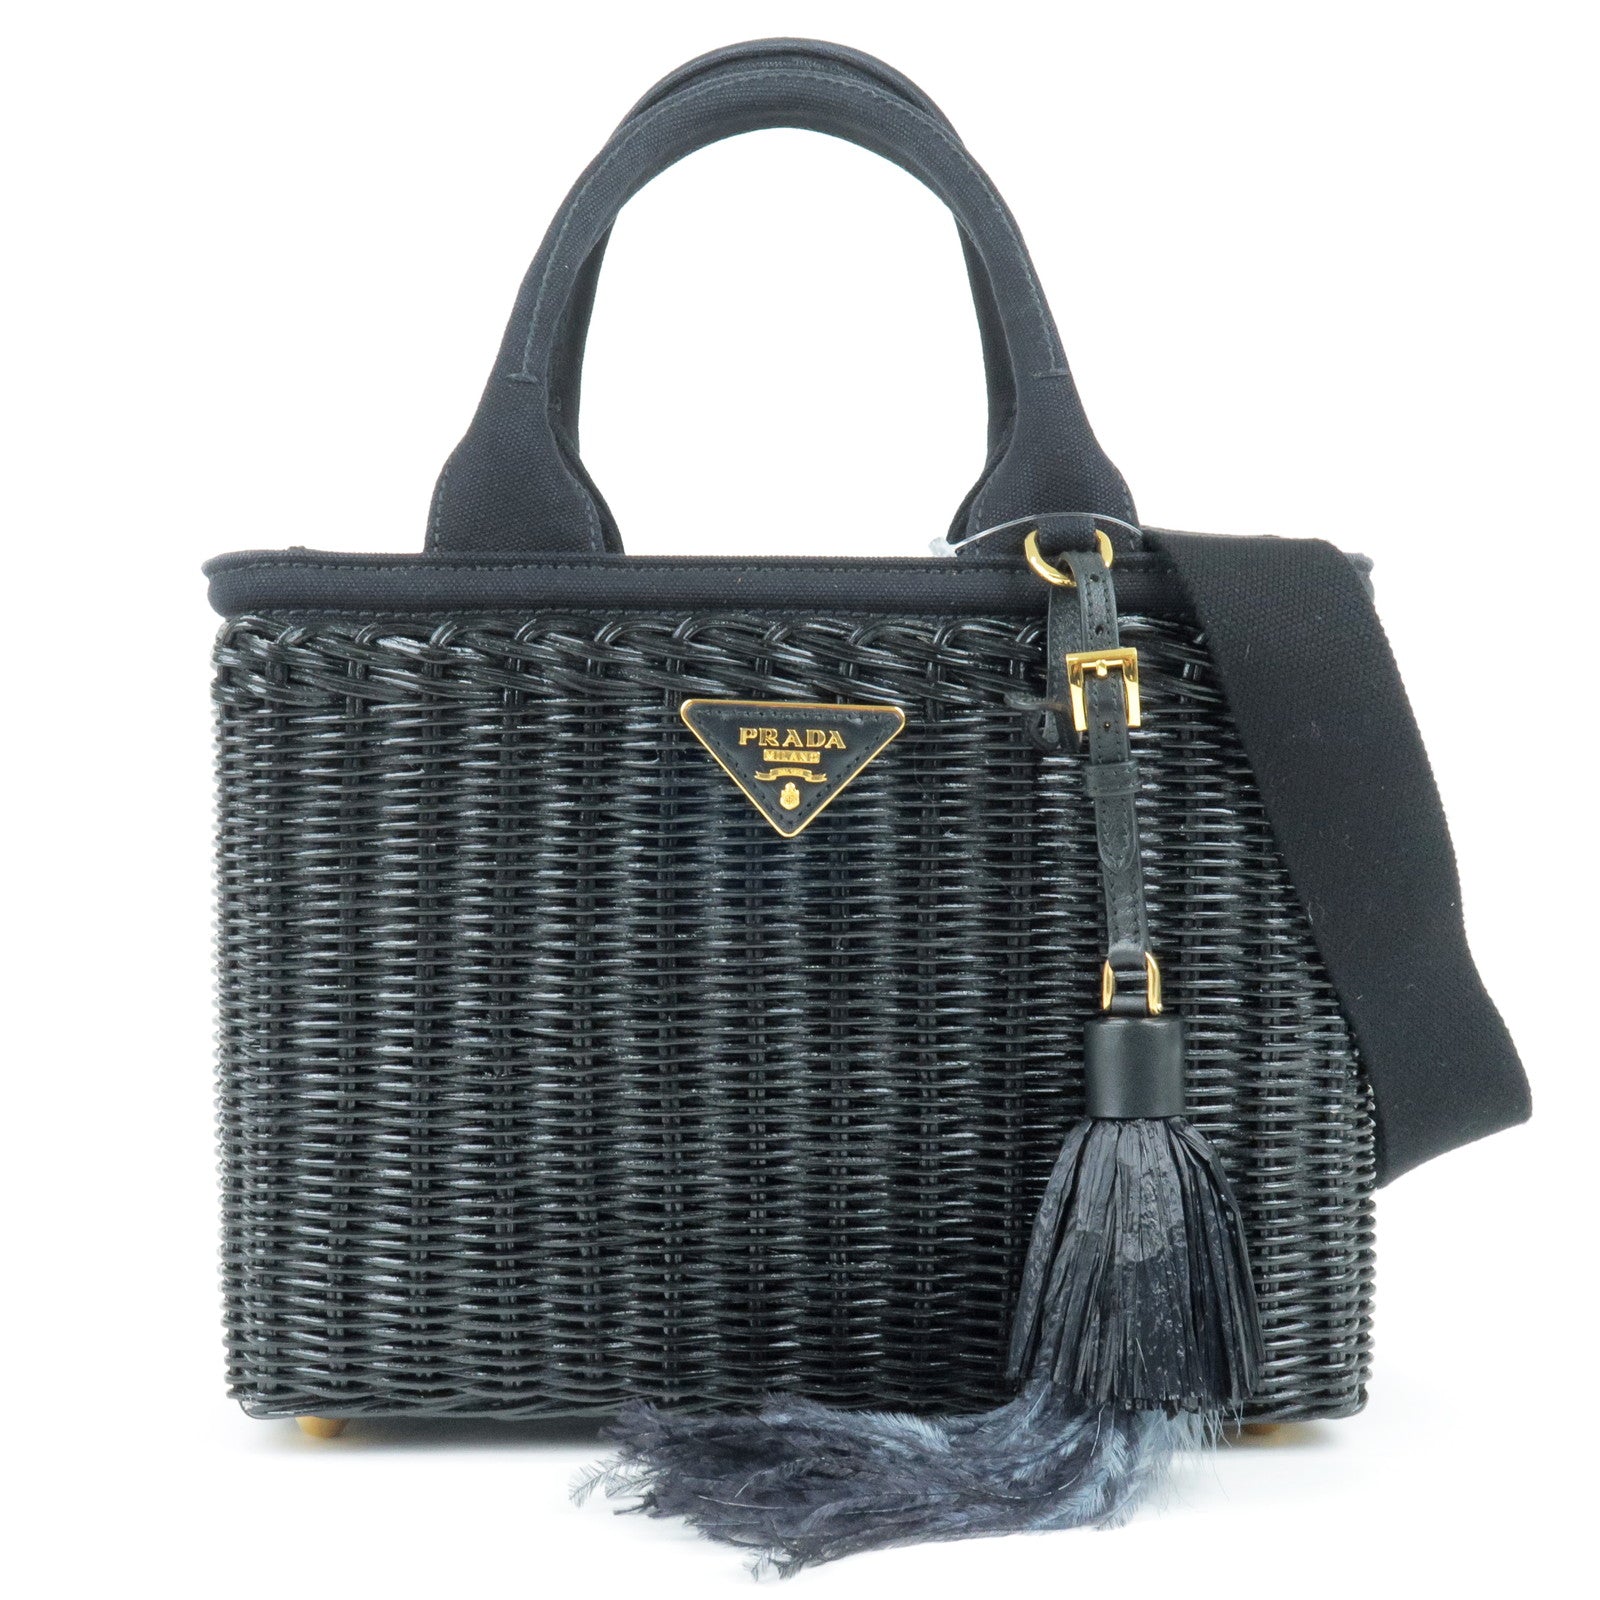 ep_vintage luxury Store - Hand - Wicker - I feel like Prada holds a certain  place of prominence among women in the news industry - Bag - Black - Canvas  - 2Way - Basket - 1BG835 – dct - Nero - Bag - PRADA